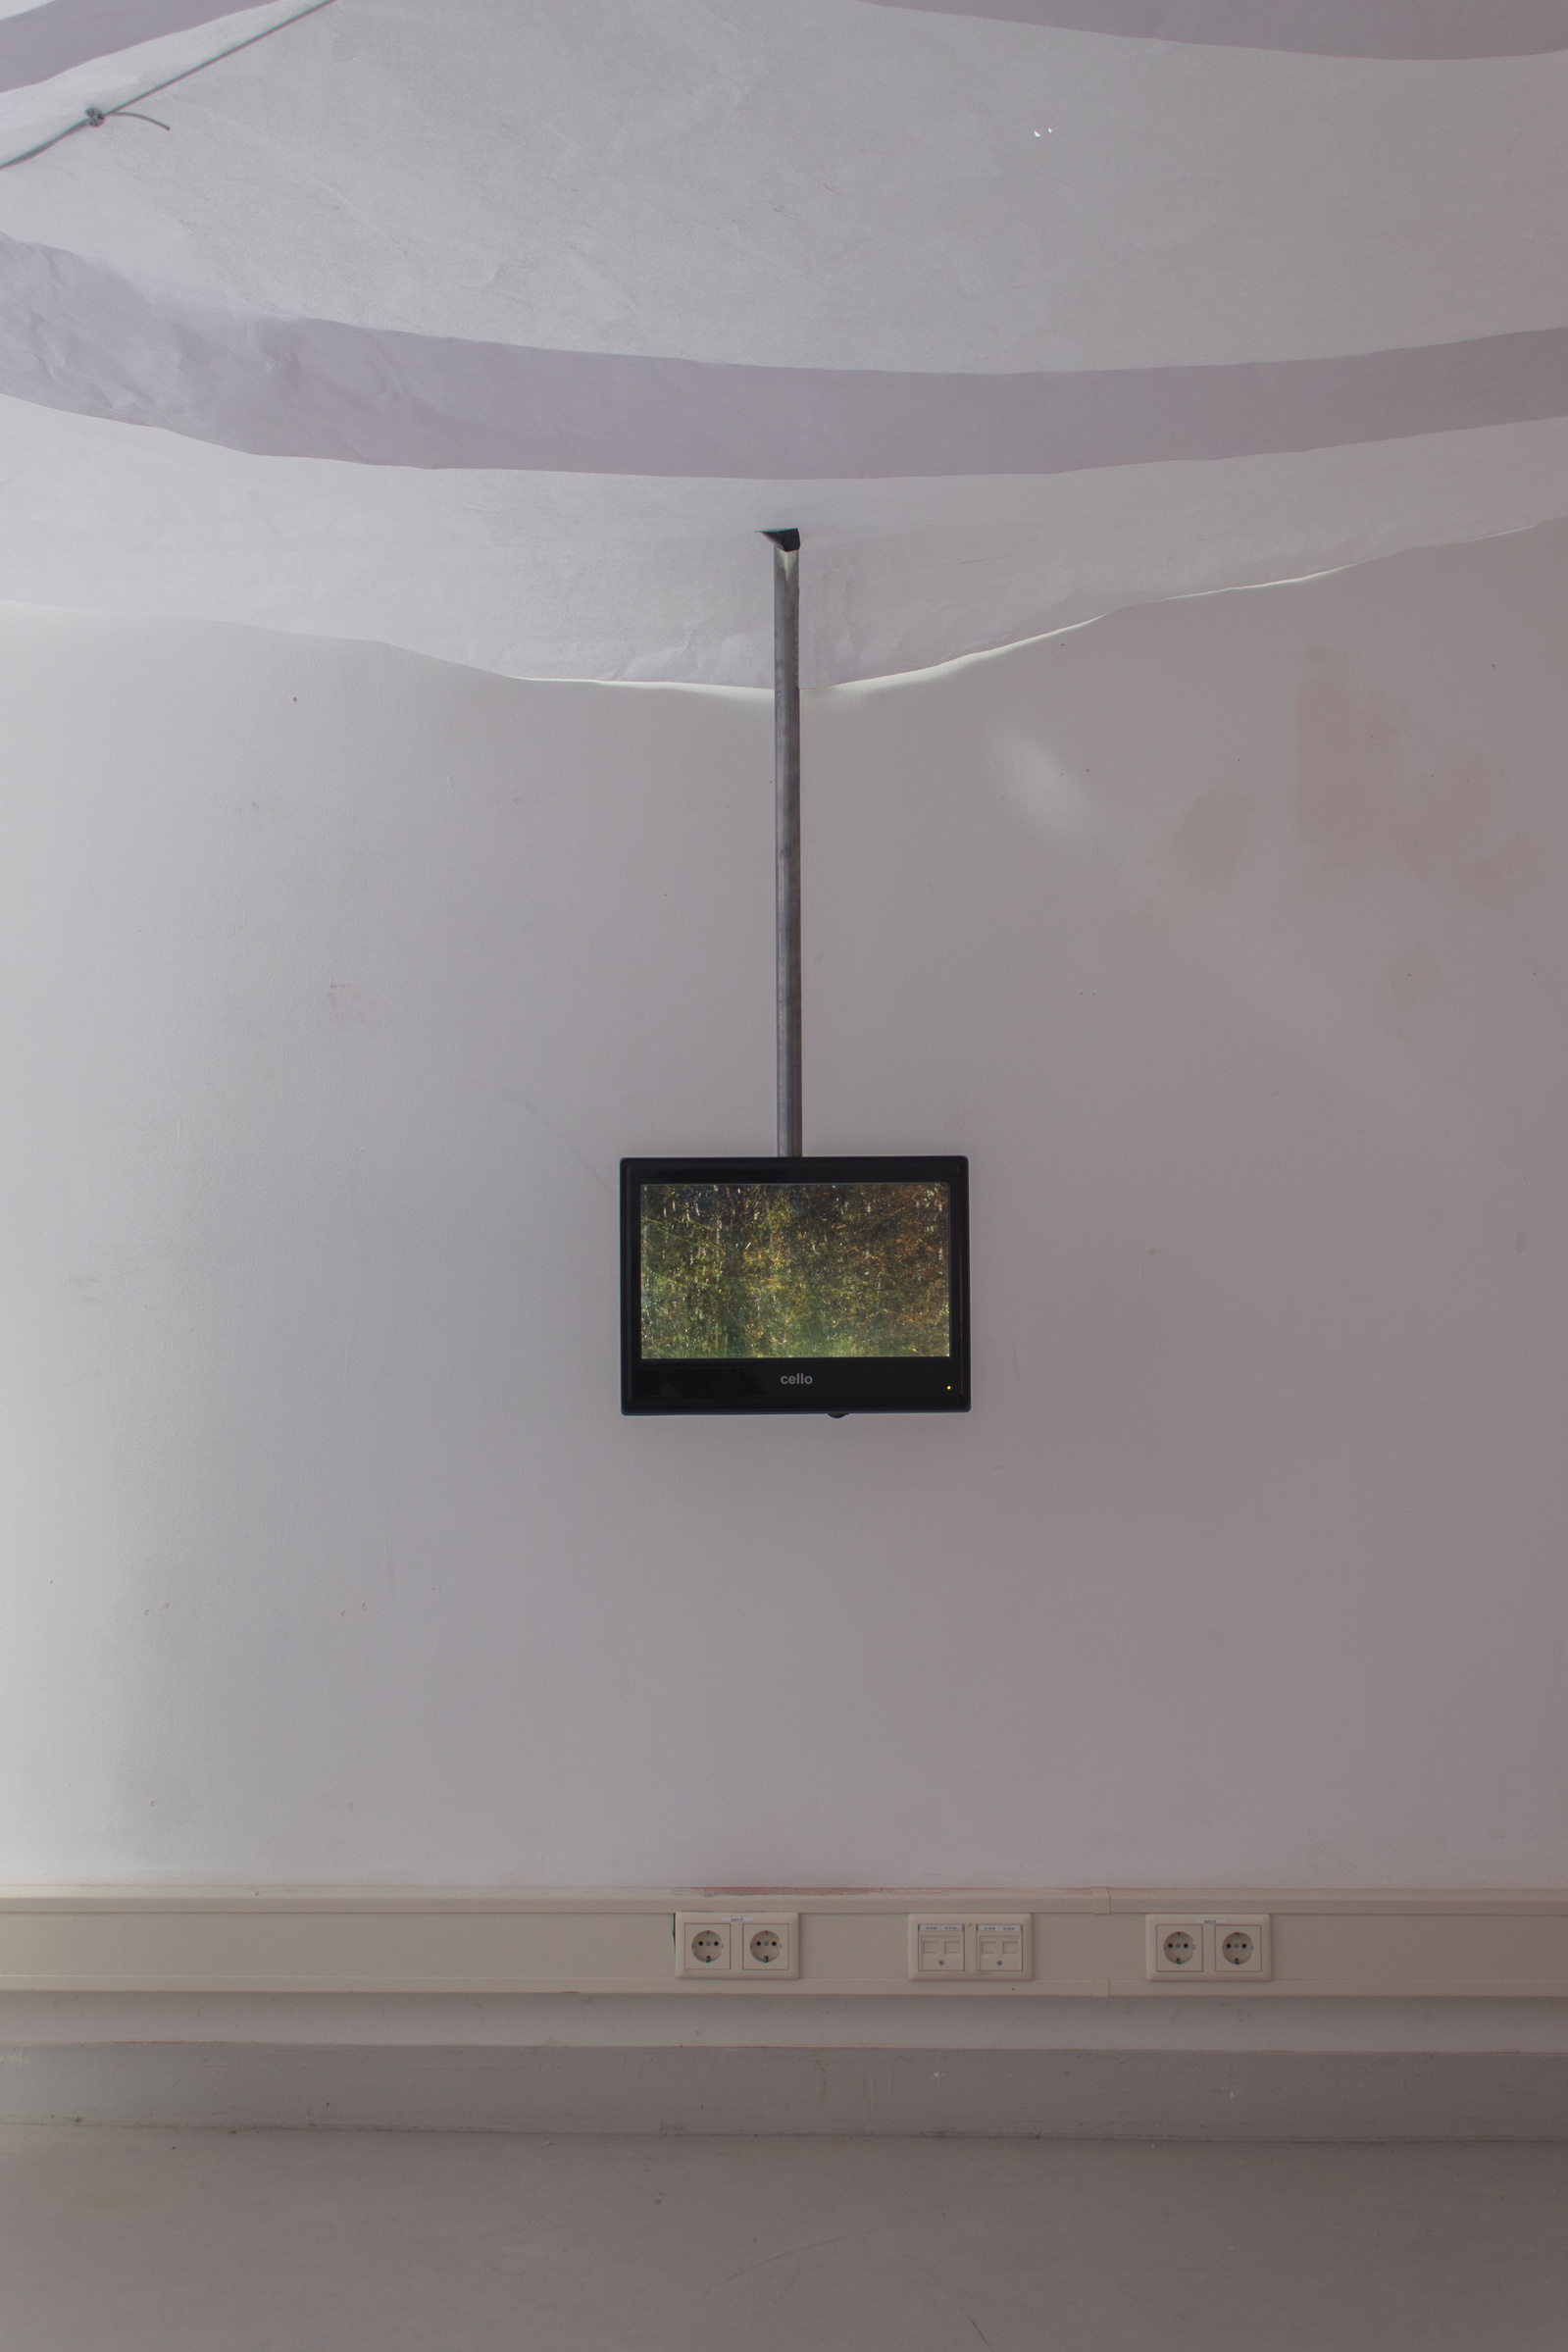 A room with paper ceiling. There is a video monitor on to behind coming down from the ceiling. On the monitor is a blurry image of green foliage. Jamie Kane